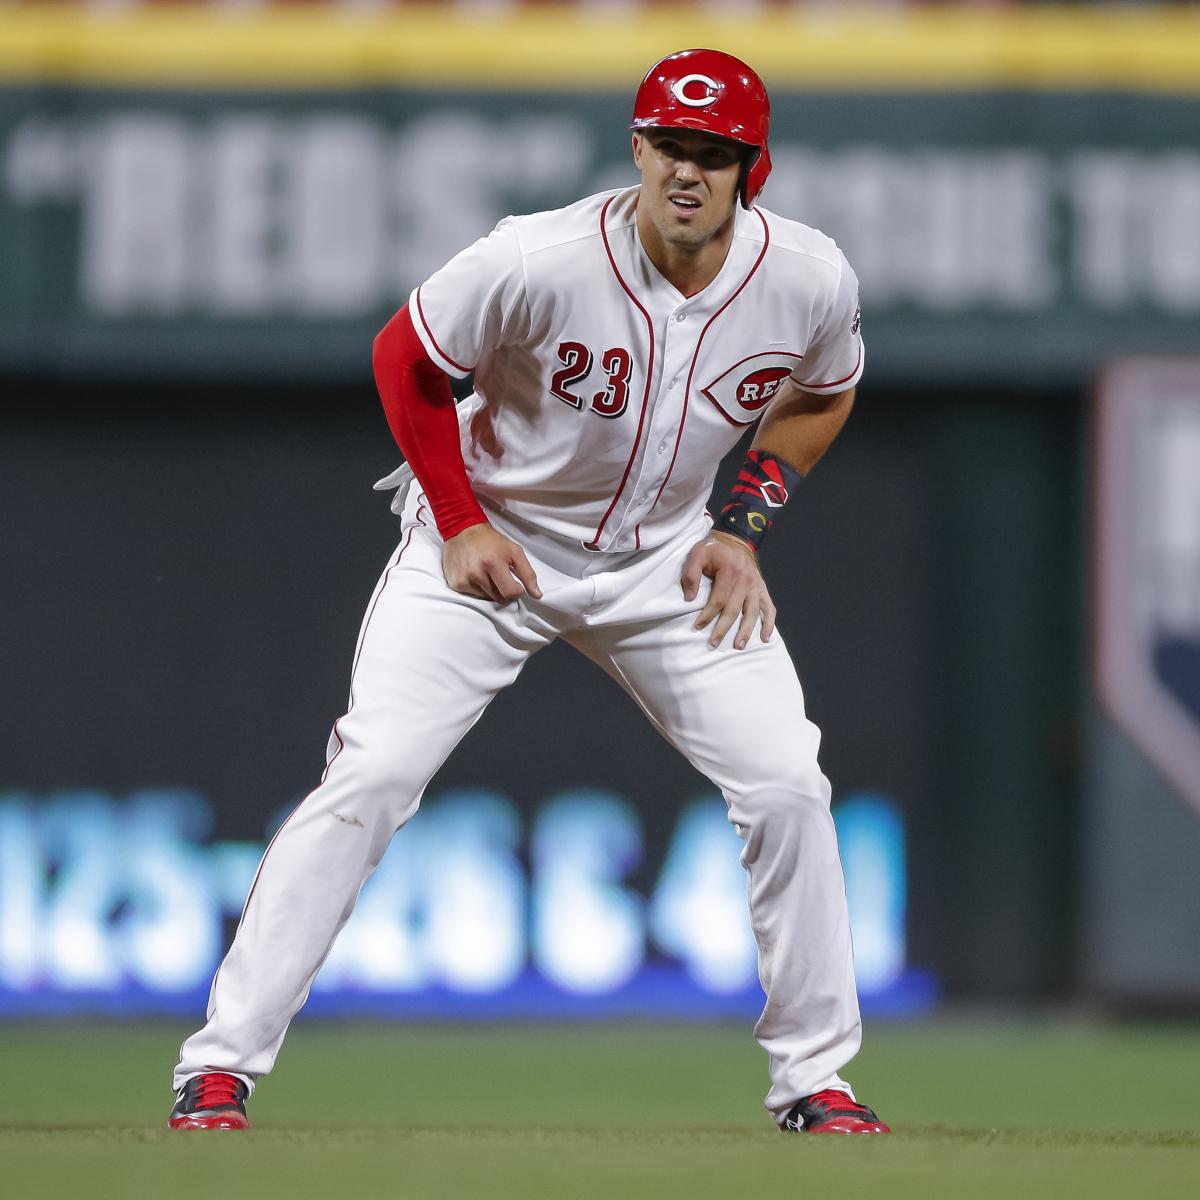 With an eye on the future, the Reds ship Adam Duvall to the Braves